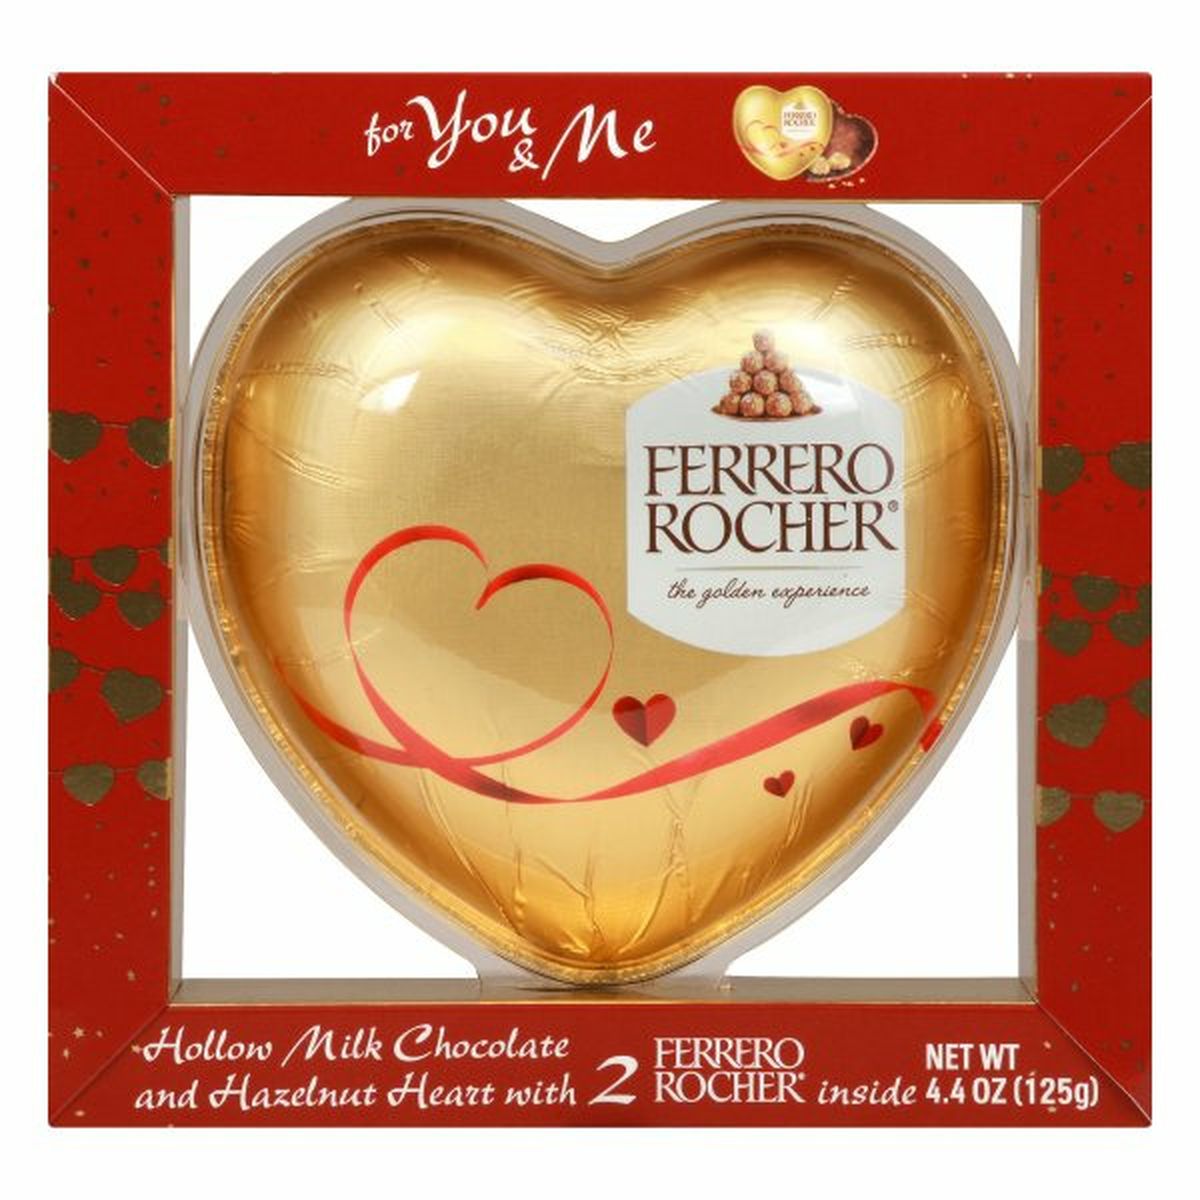 Calories in Ferrero Rocher Hollow Milk Chocolate and Hazelnut Heart, For You & Me